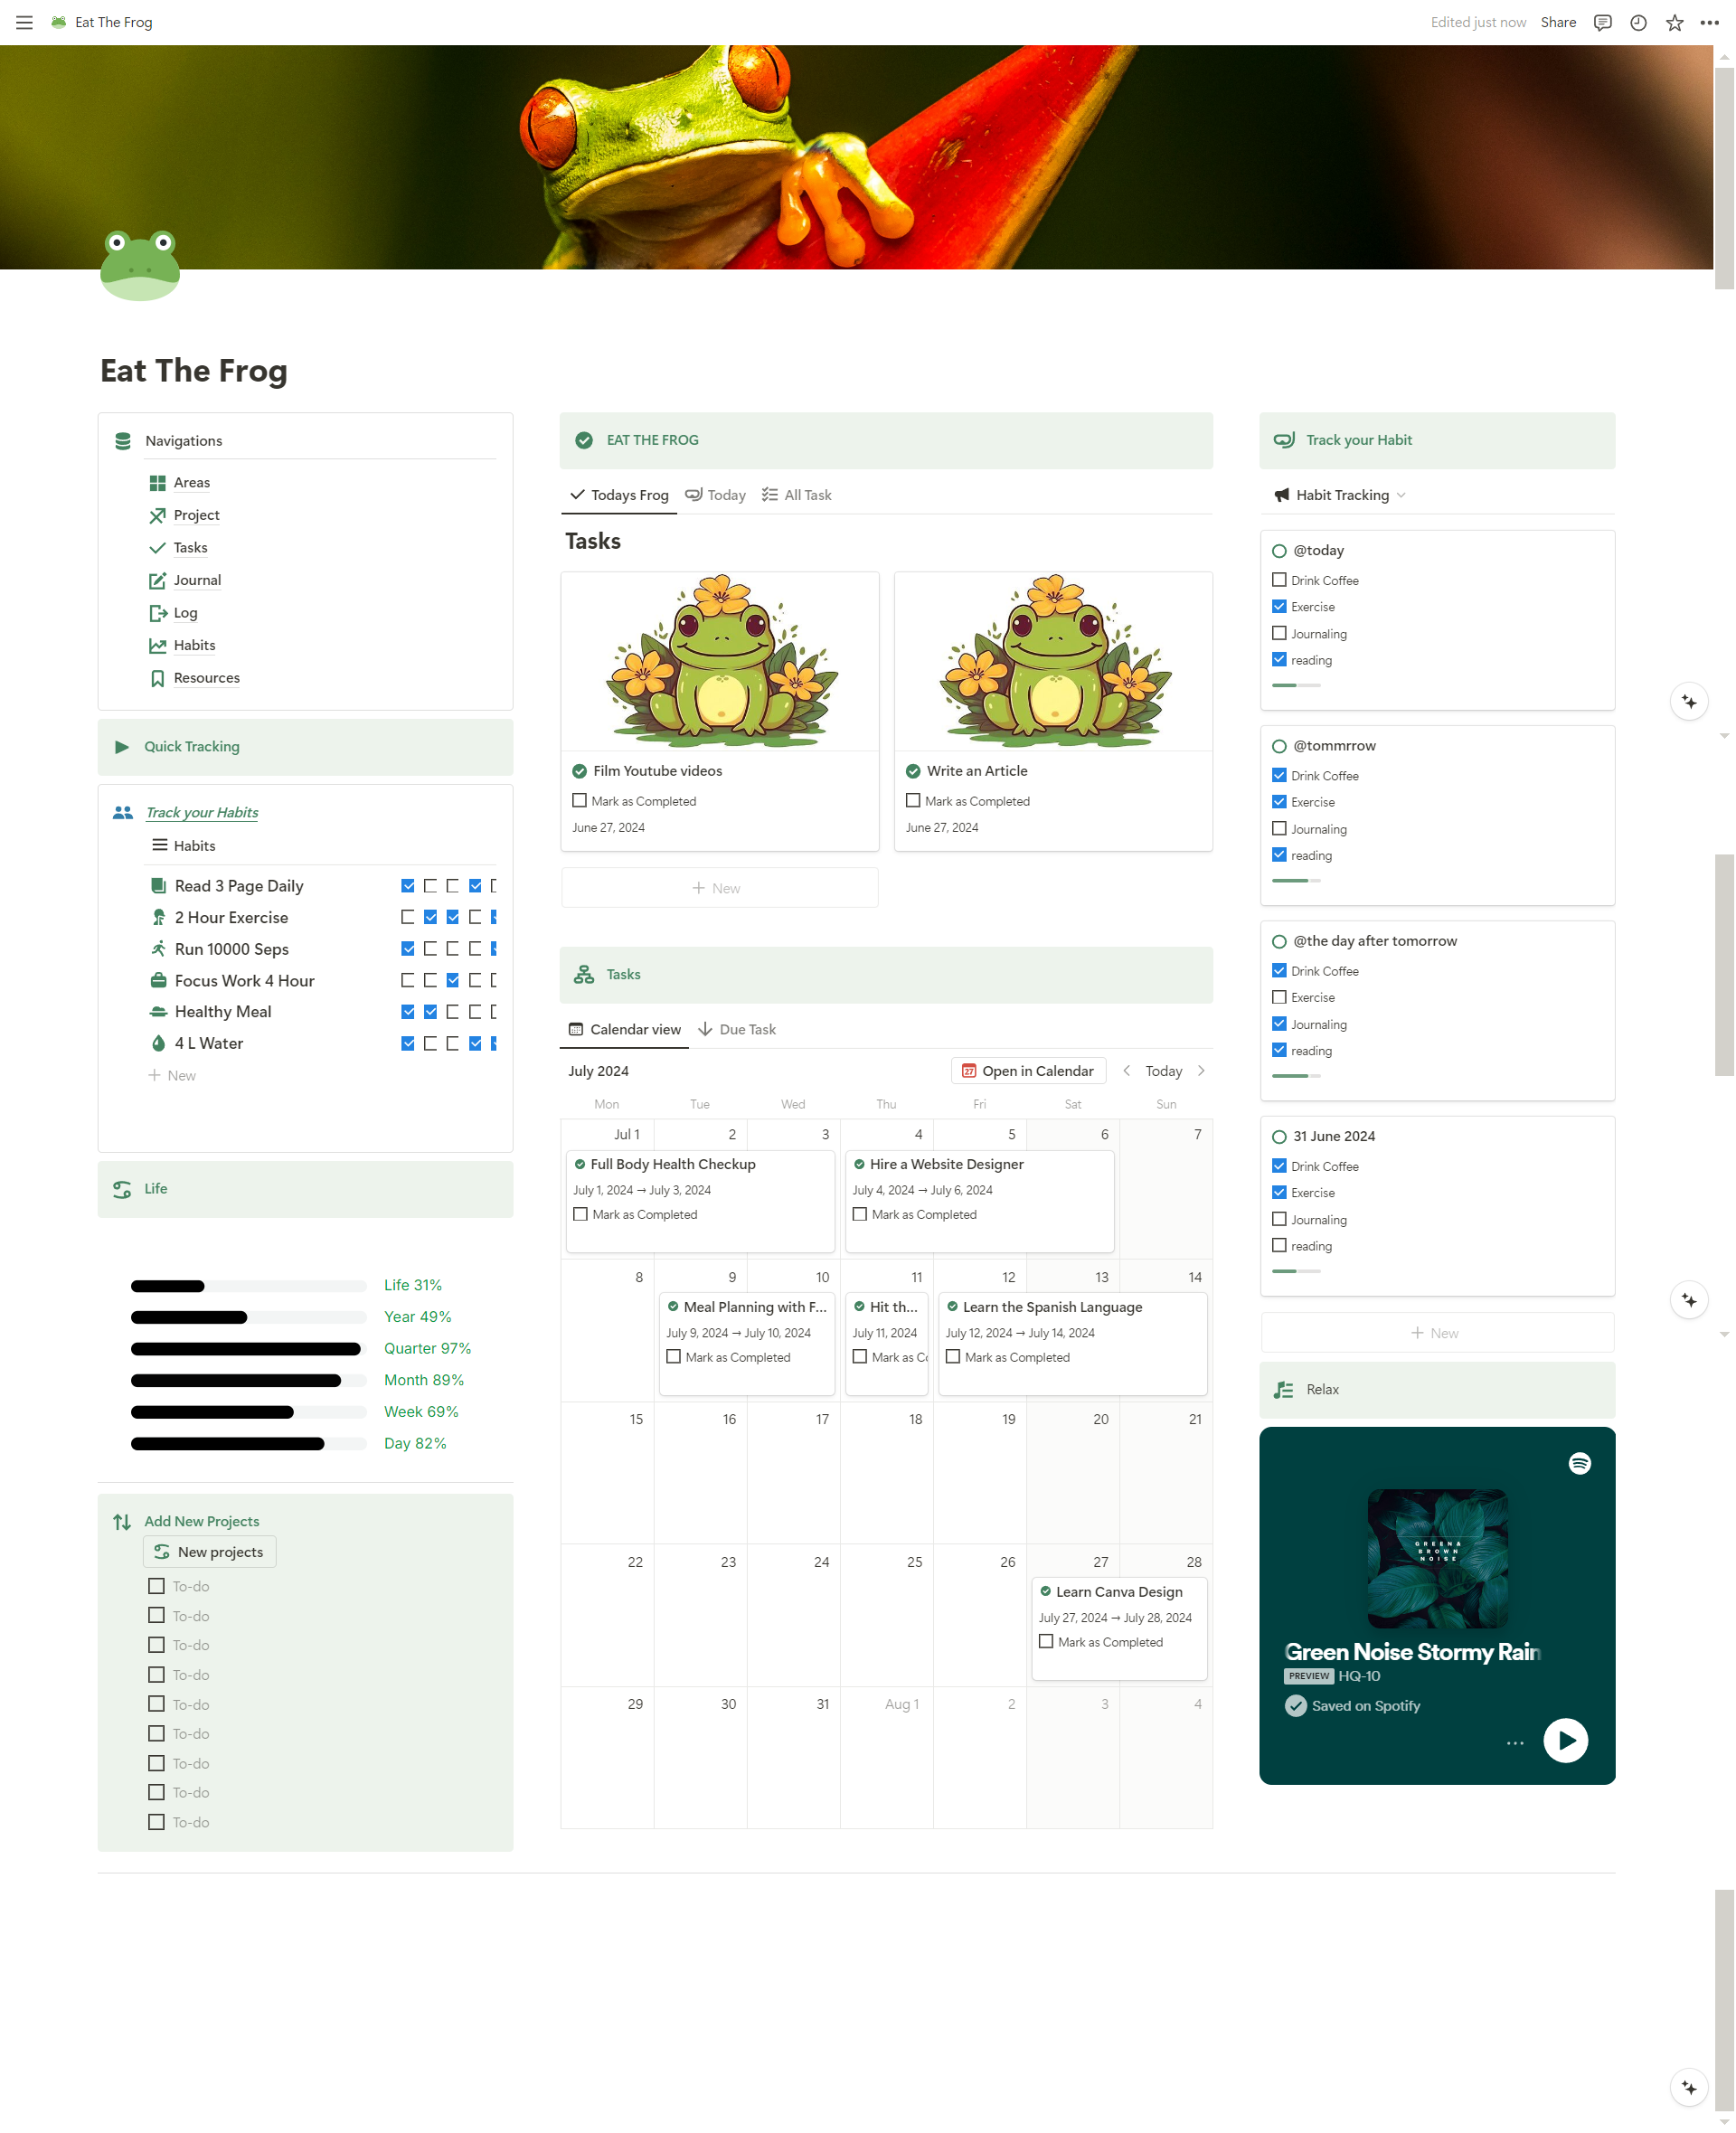 Conquer Procrastination, One Frog at a Time!

Eat That Frog Template

This "Eat That Frog" Notion template is designed to help you conquer procrastination and enhance your productivity by focusing on your most important tasks each day.